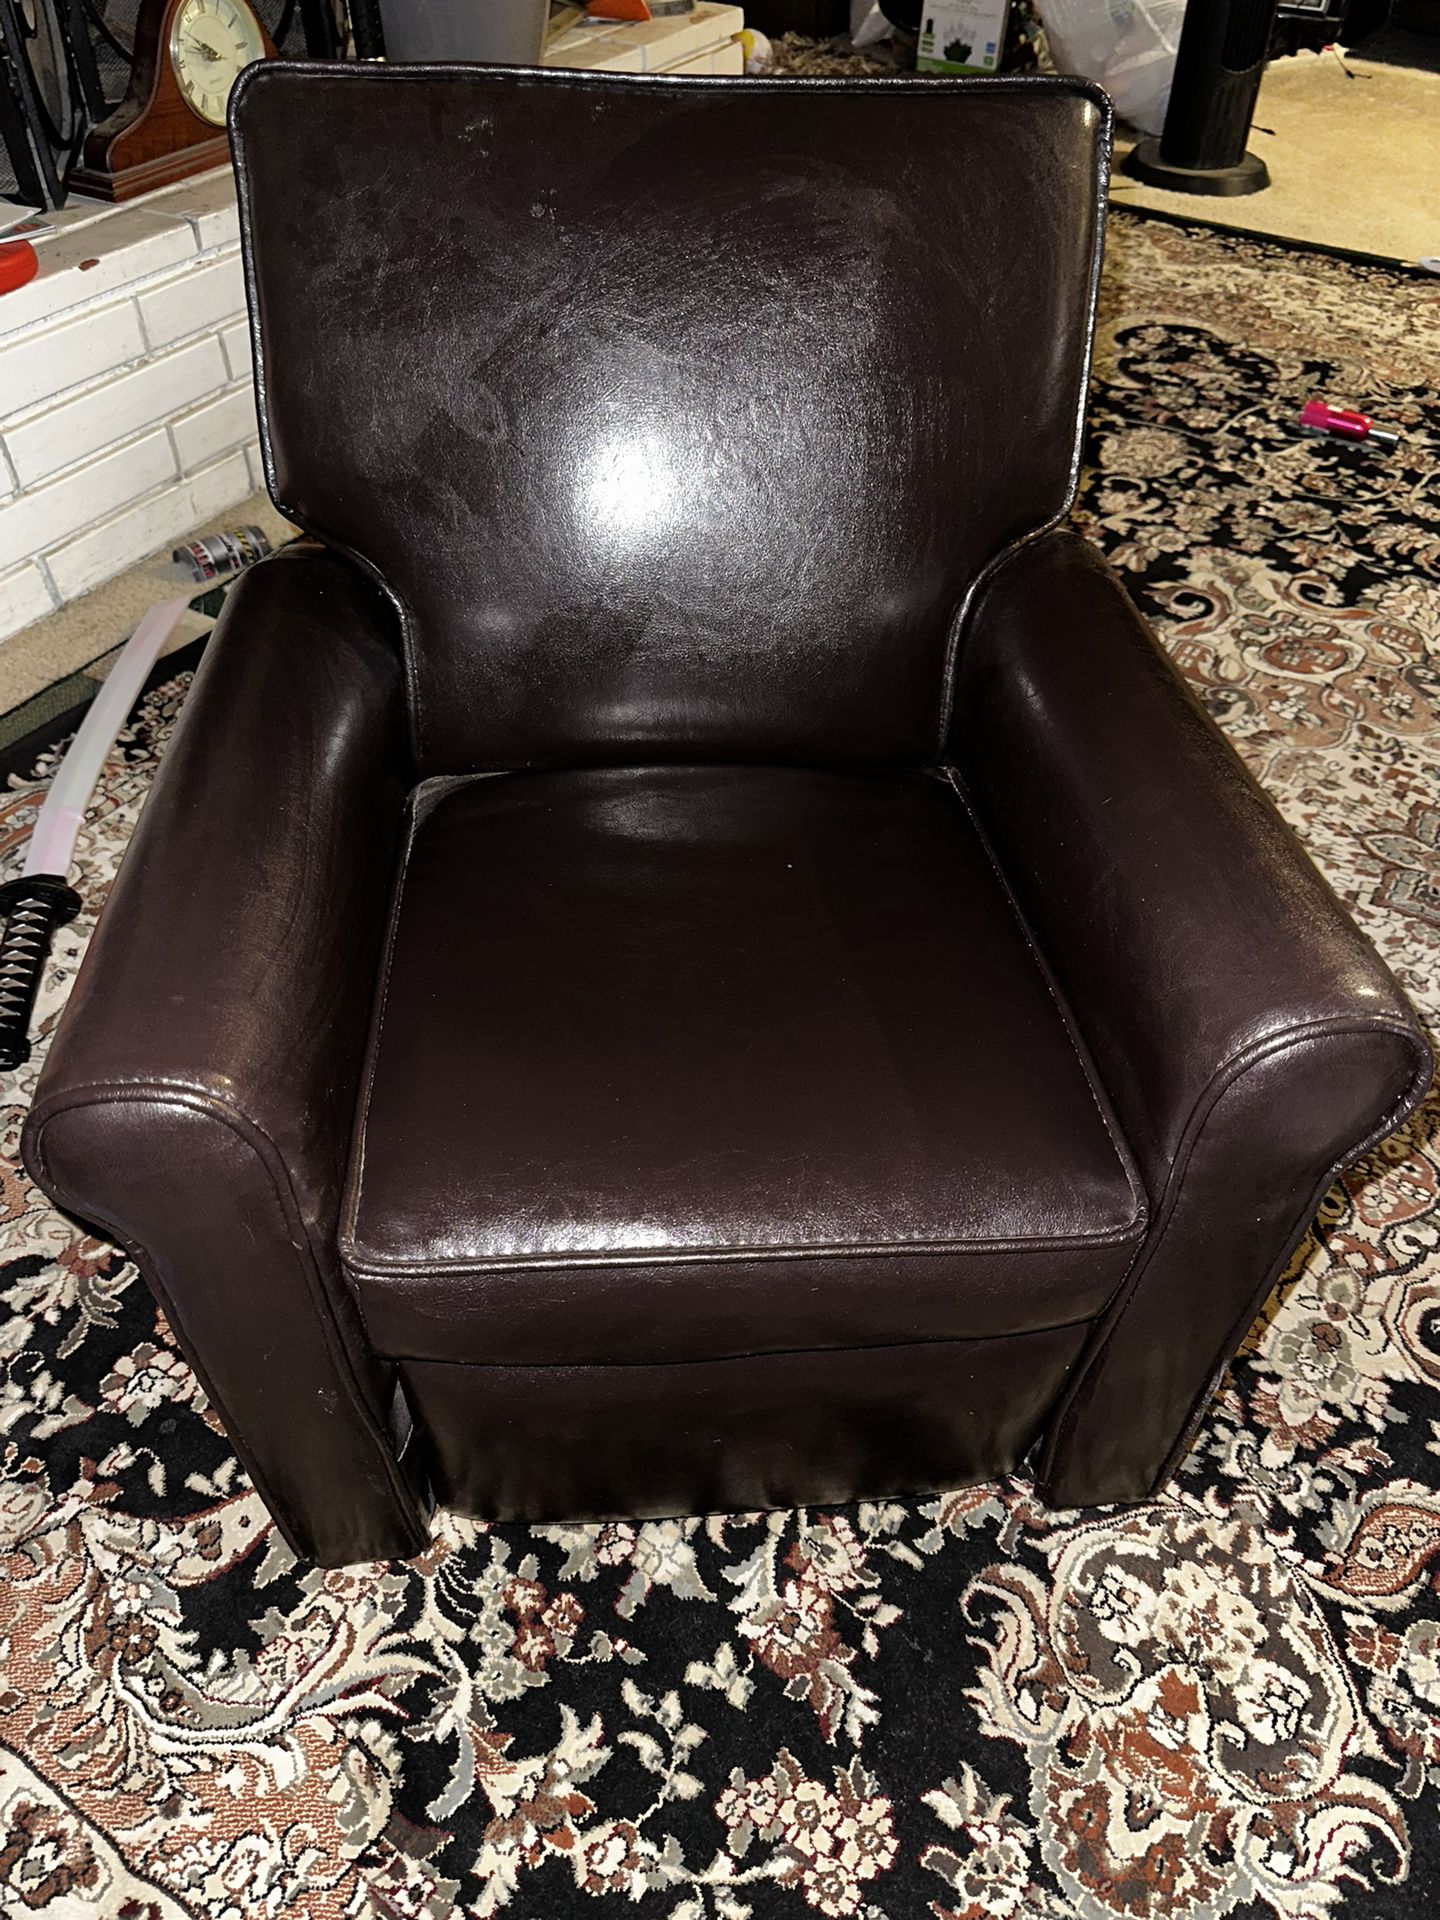 Kids Leather Recliner